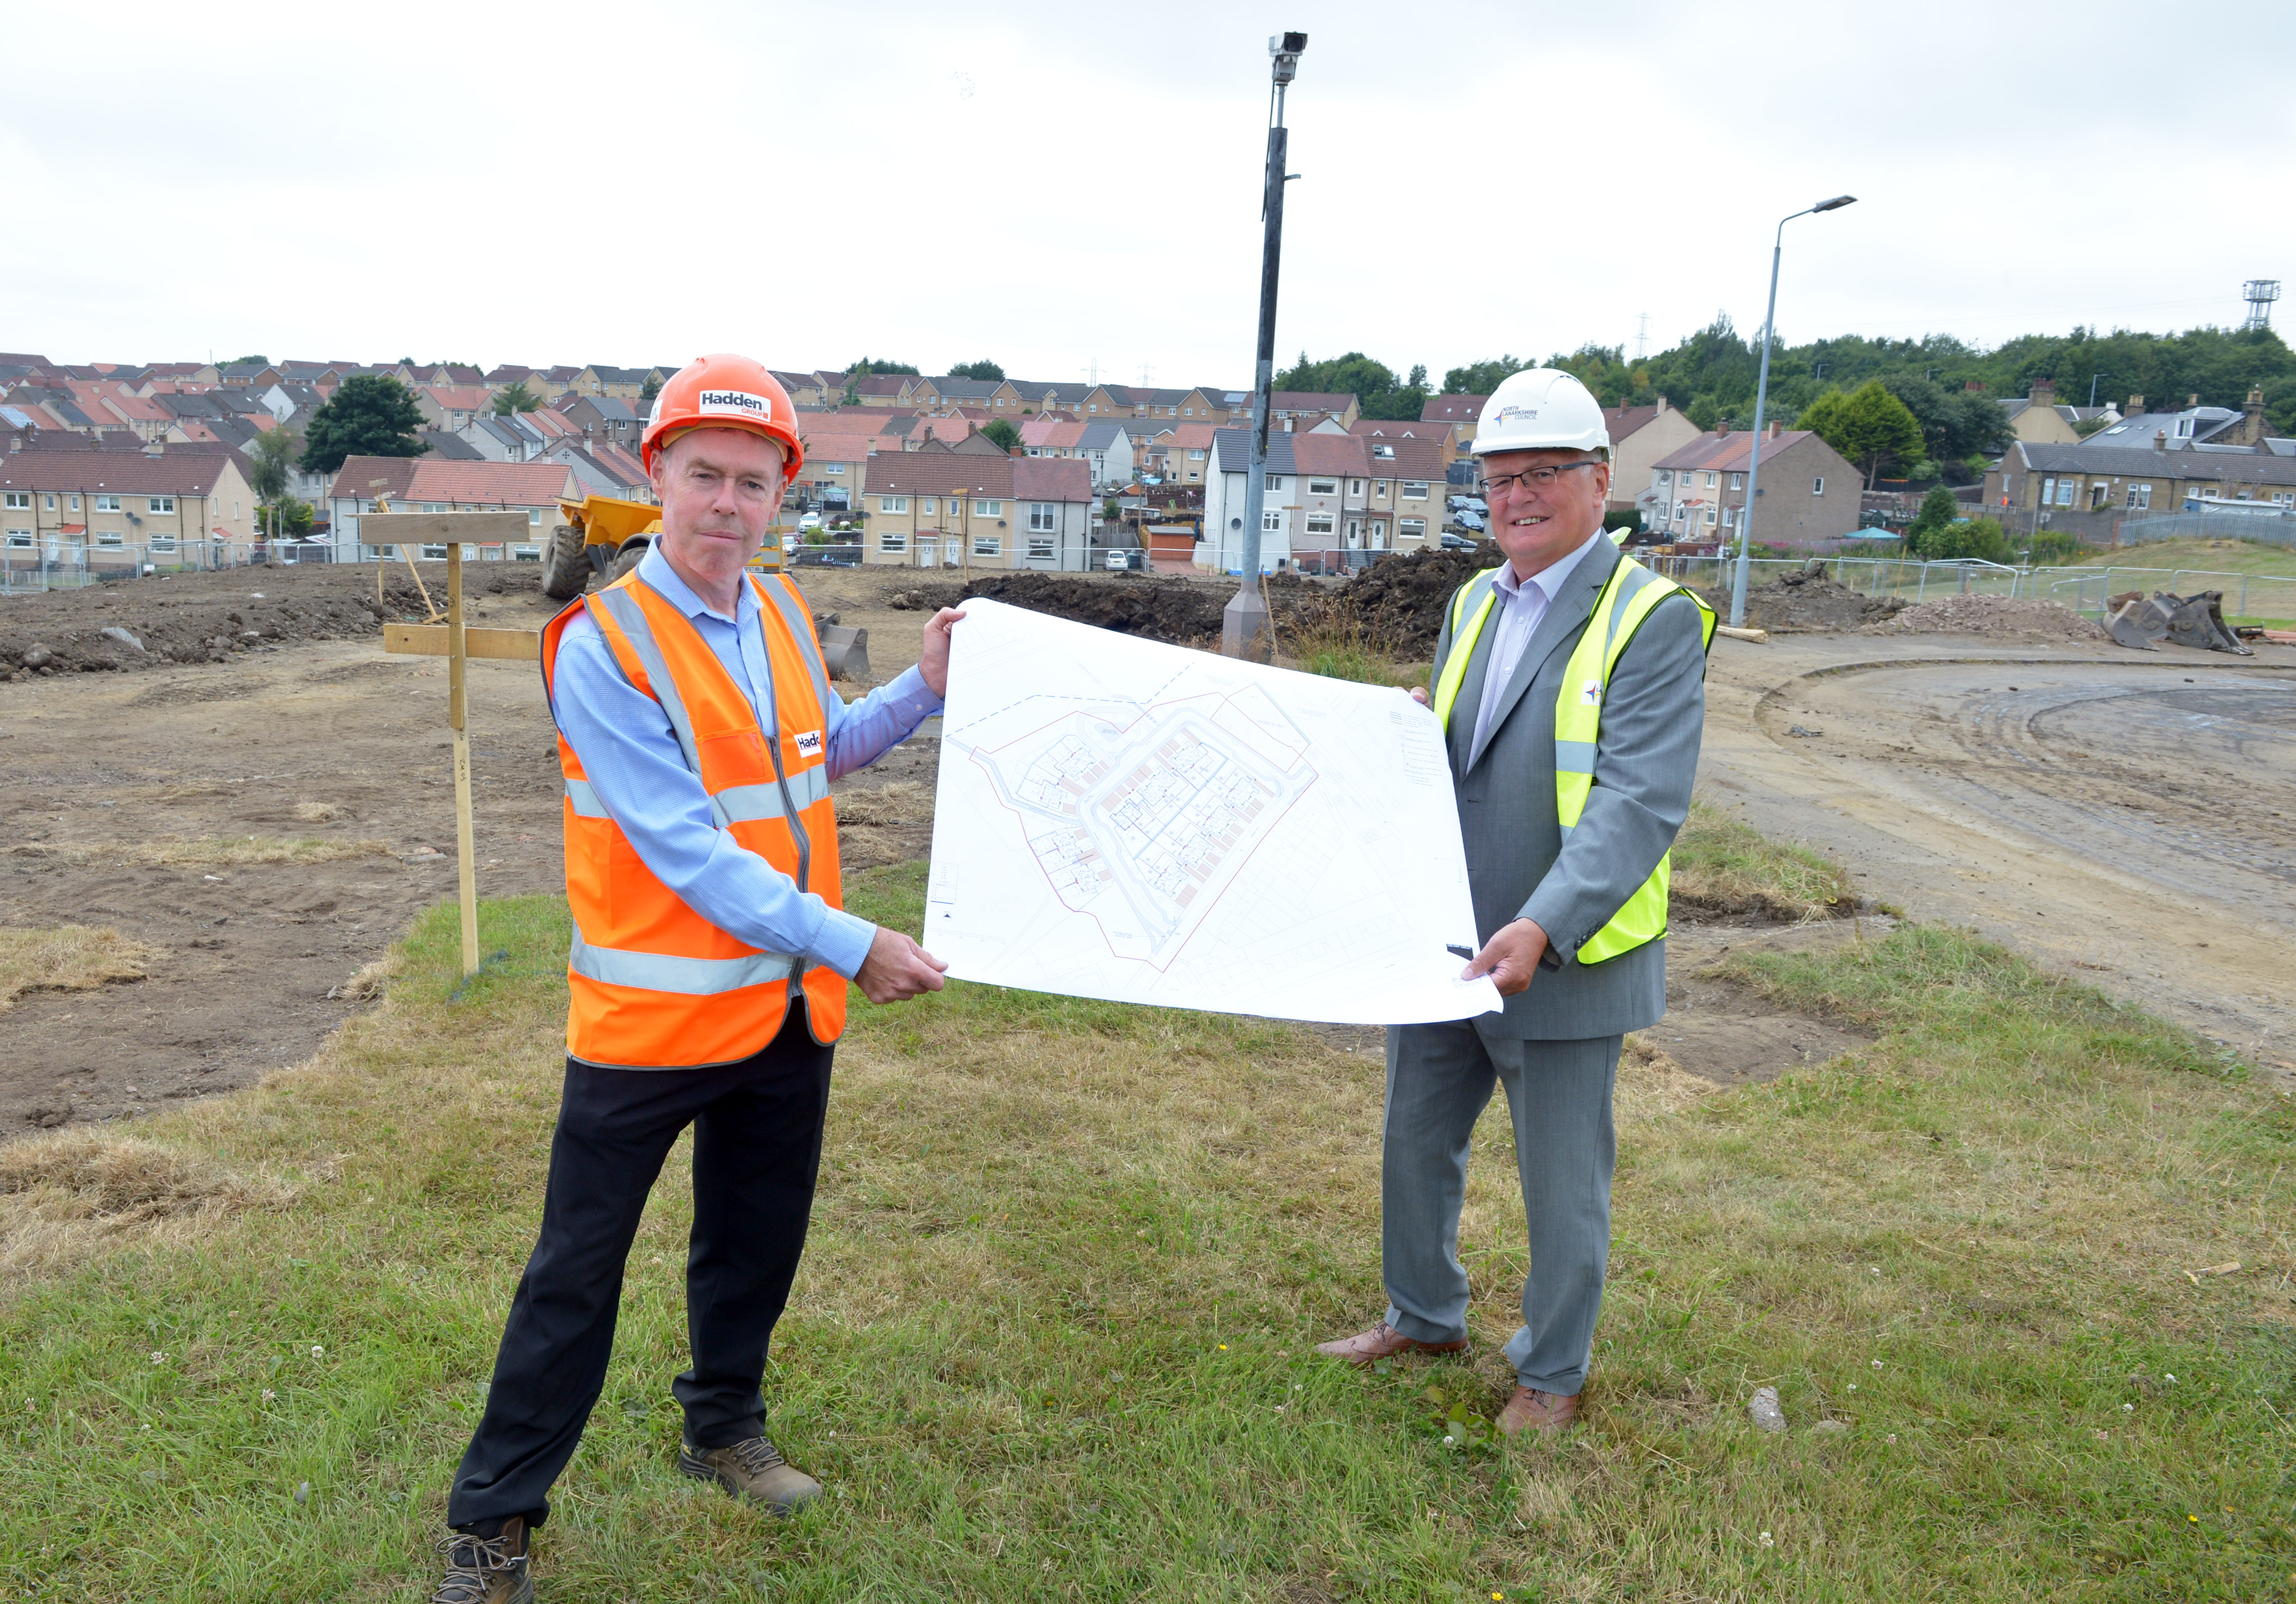 Work to create towns and communities for the future taking shape in North Lanarkshire